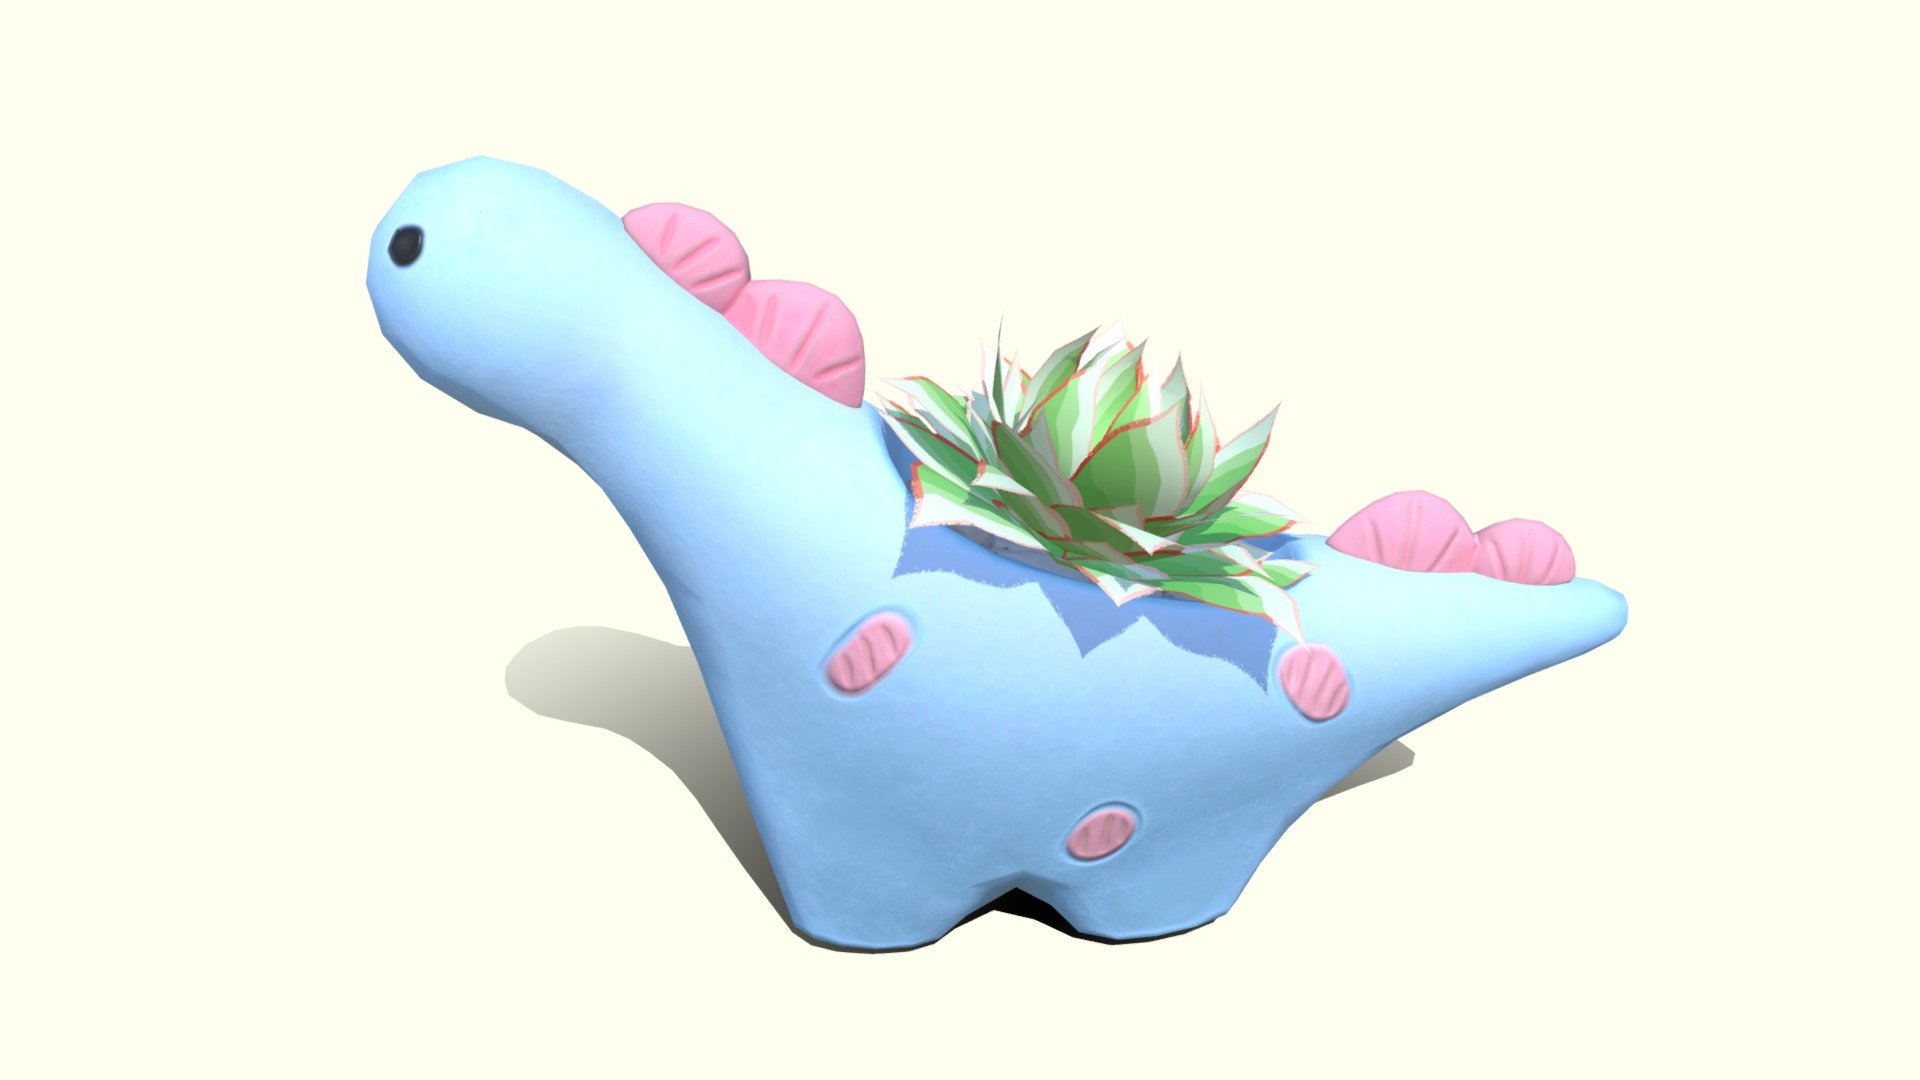 Welcome

This is the presentation of my work. The model witch you can see is made as a low poly, stylized and textured asset.

This asset pack contains:

Cute planter pot, plant.

Technical information:

Texture Dinosaur - 2048 x 2048

Texture Plant - 1024x1024

Cute planter pot - 1761 tris, 880 faces, 982 verts.

Plant - 268 tris, 184 faces, 230 verts.

Contact details:

lukas.boban123@gmail.com

https://www.facebook.com/lukas.boban/

Thank you for taking look please consider leave like 3d model